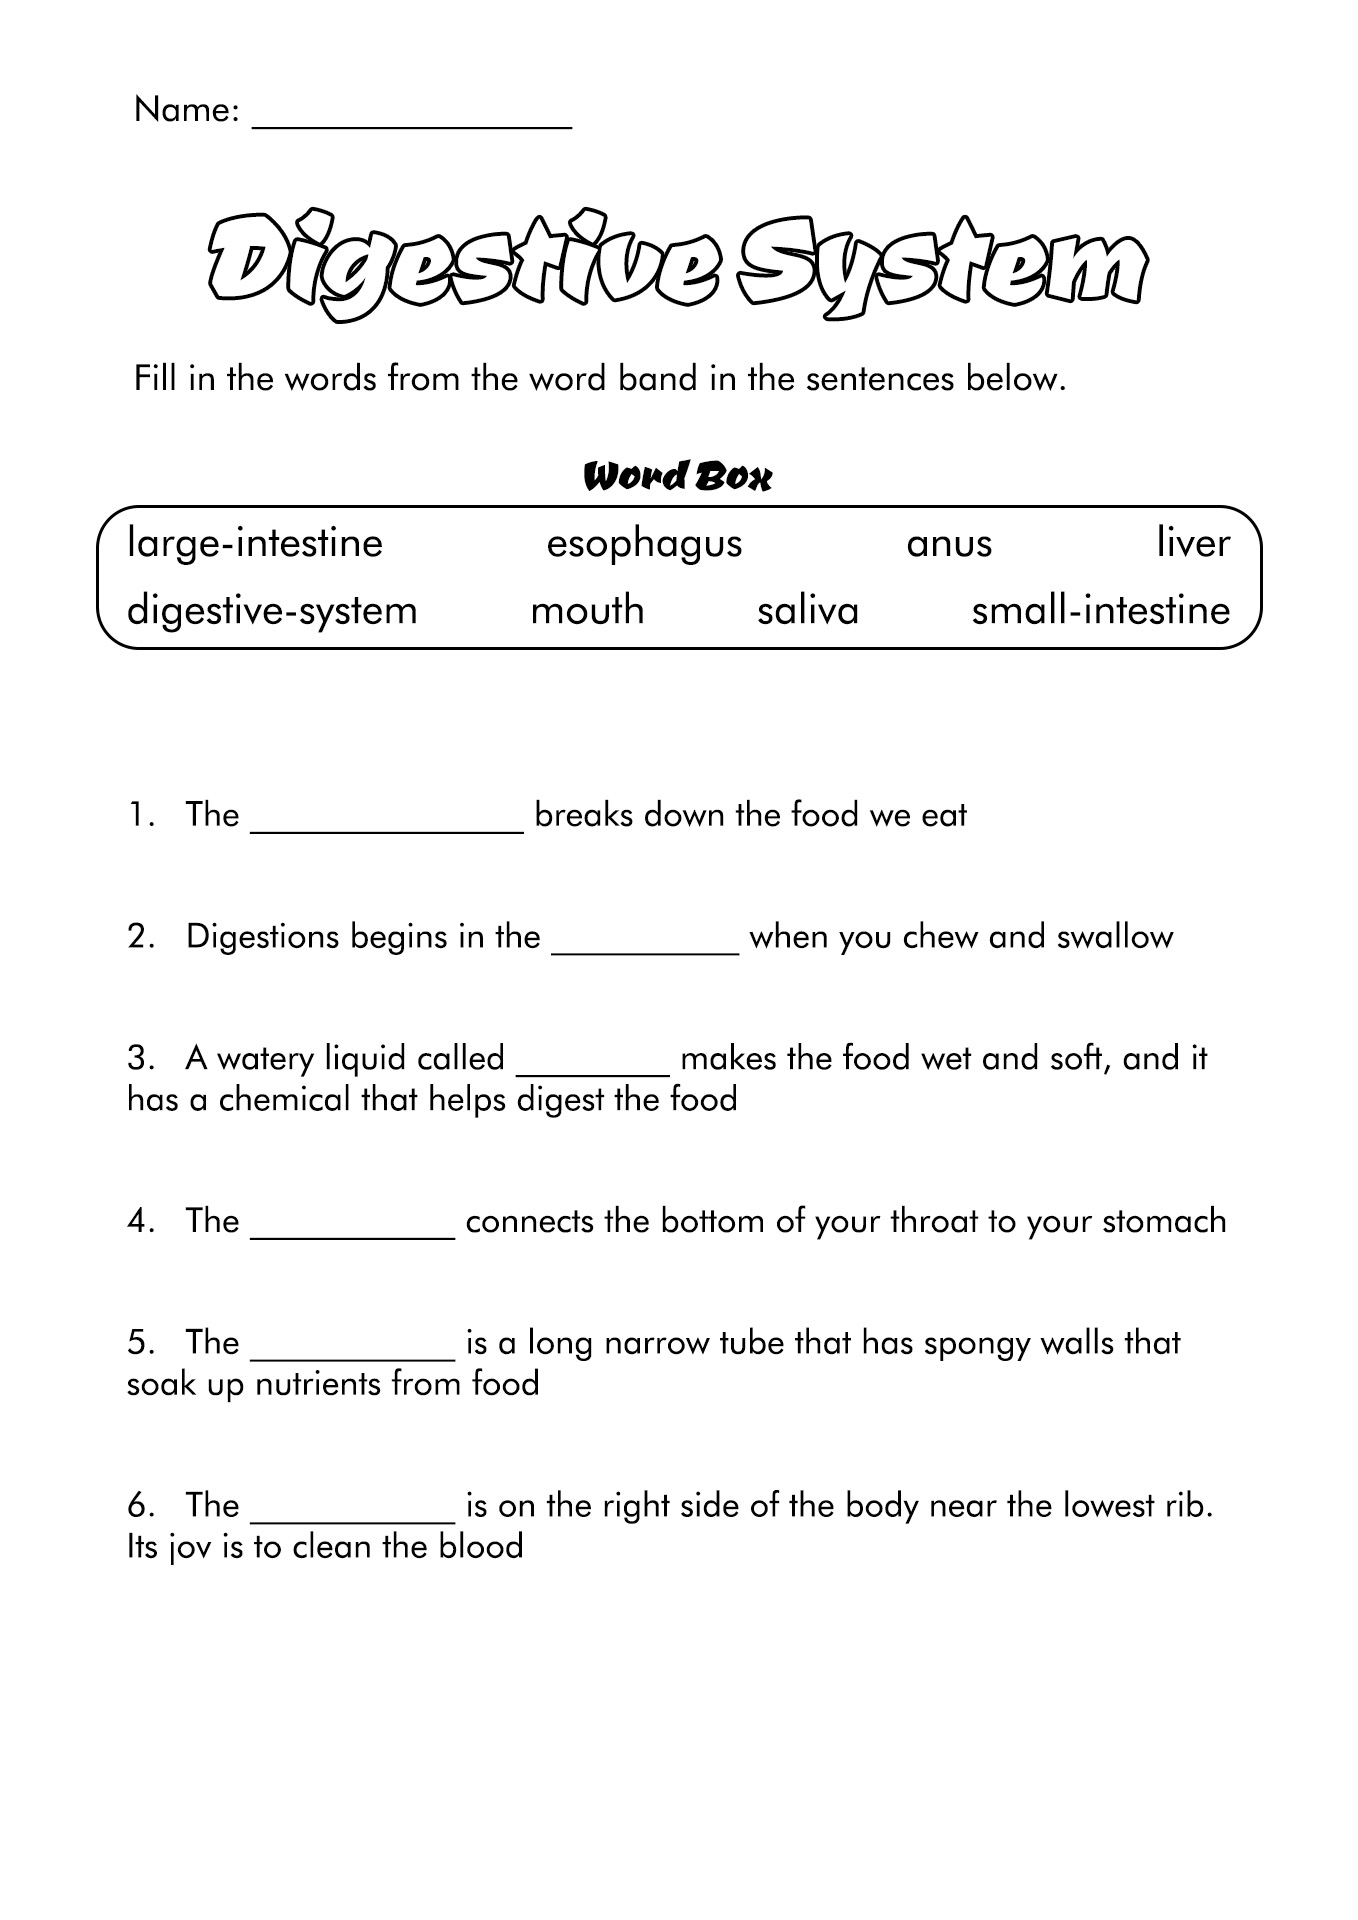 6th Grade Science Worksheets